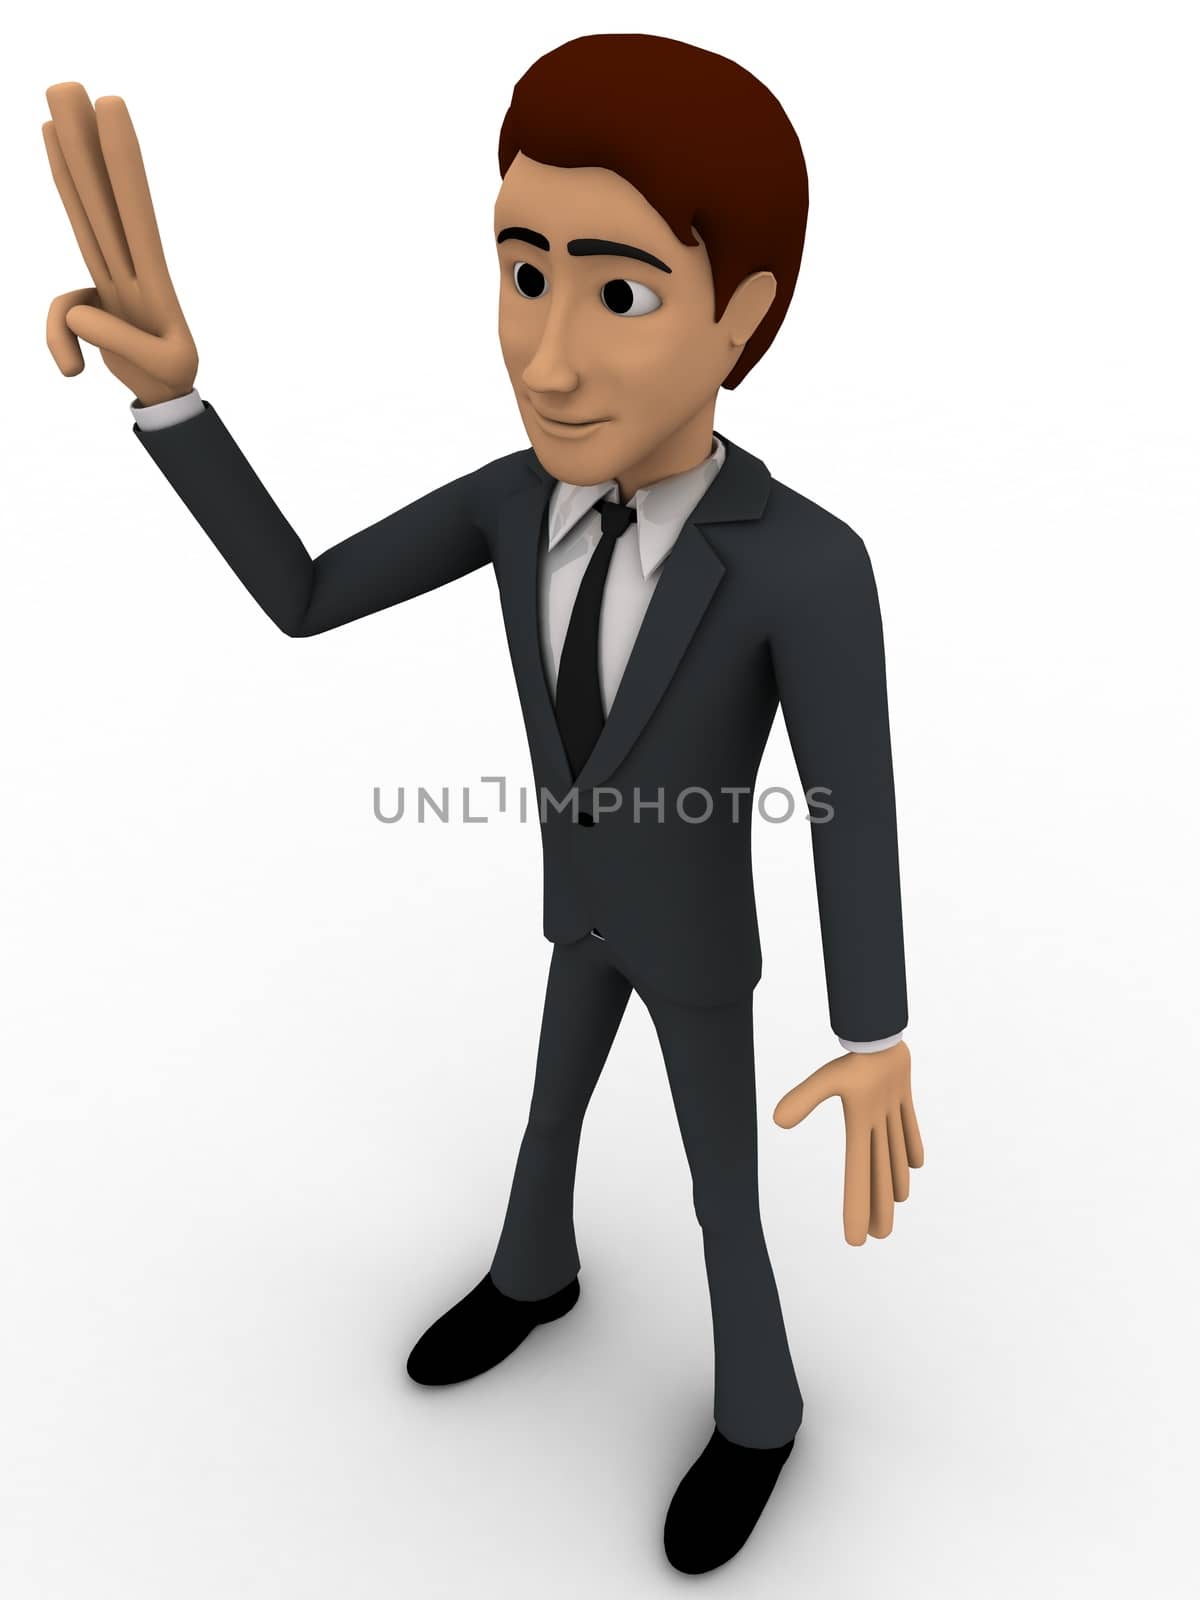 3d man showing three finguress to others concept on white background, side angle view